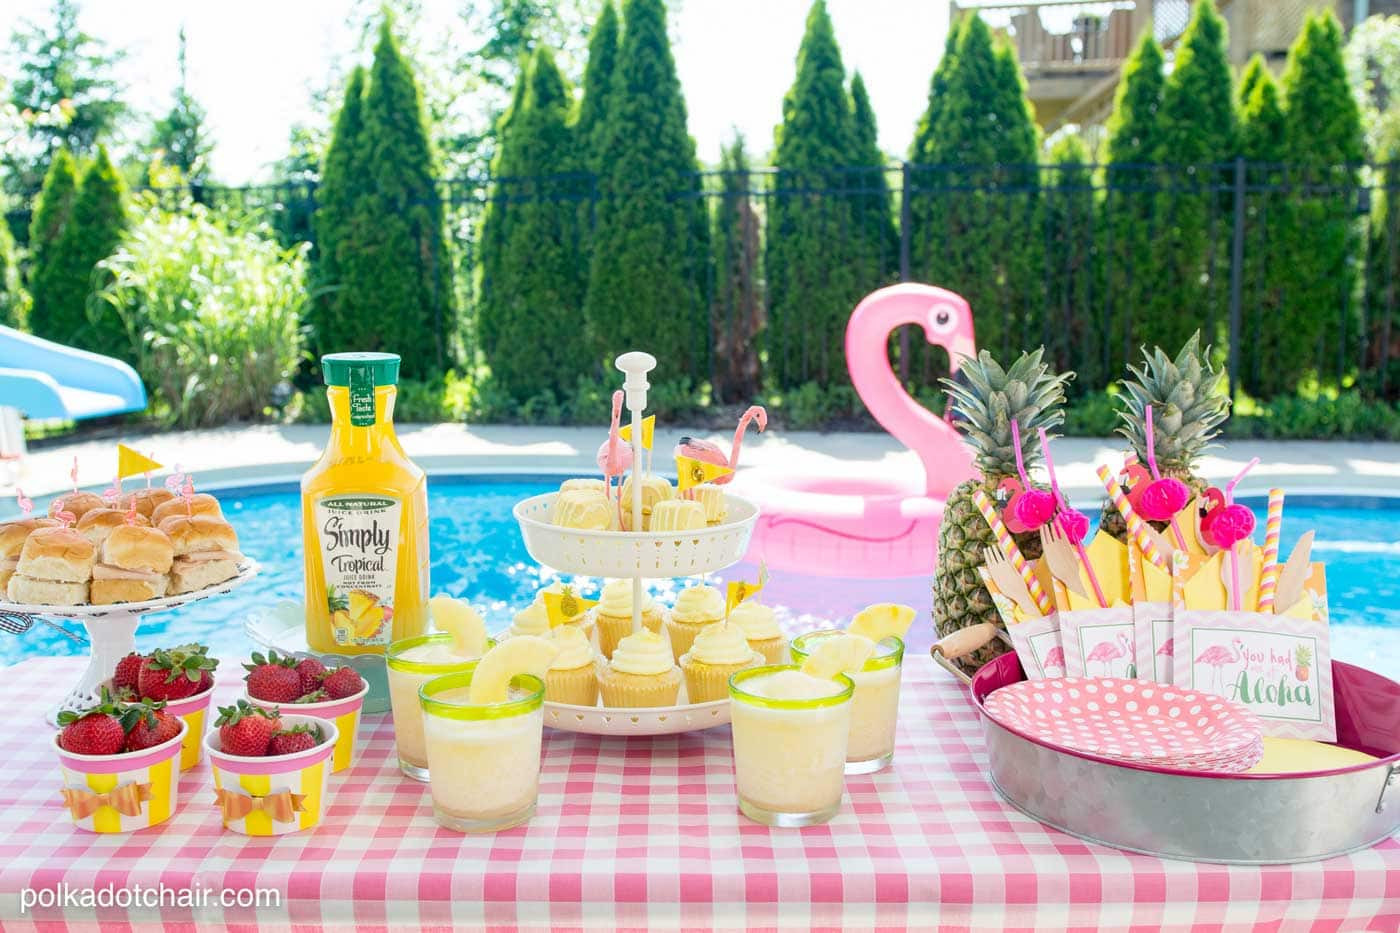 Fun Pool Party Ideas
 simply tropical pool party The Polka Dot Chair